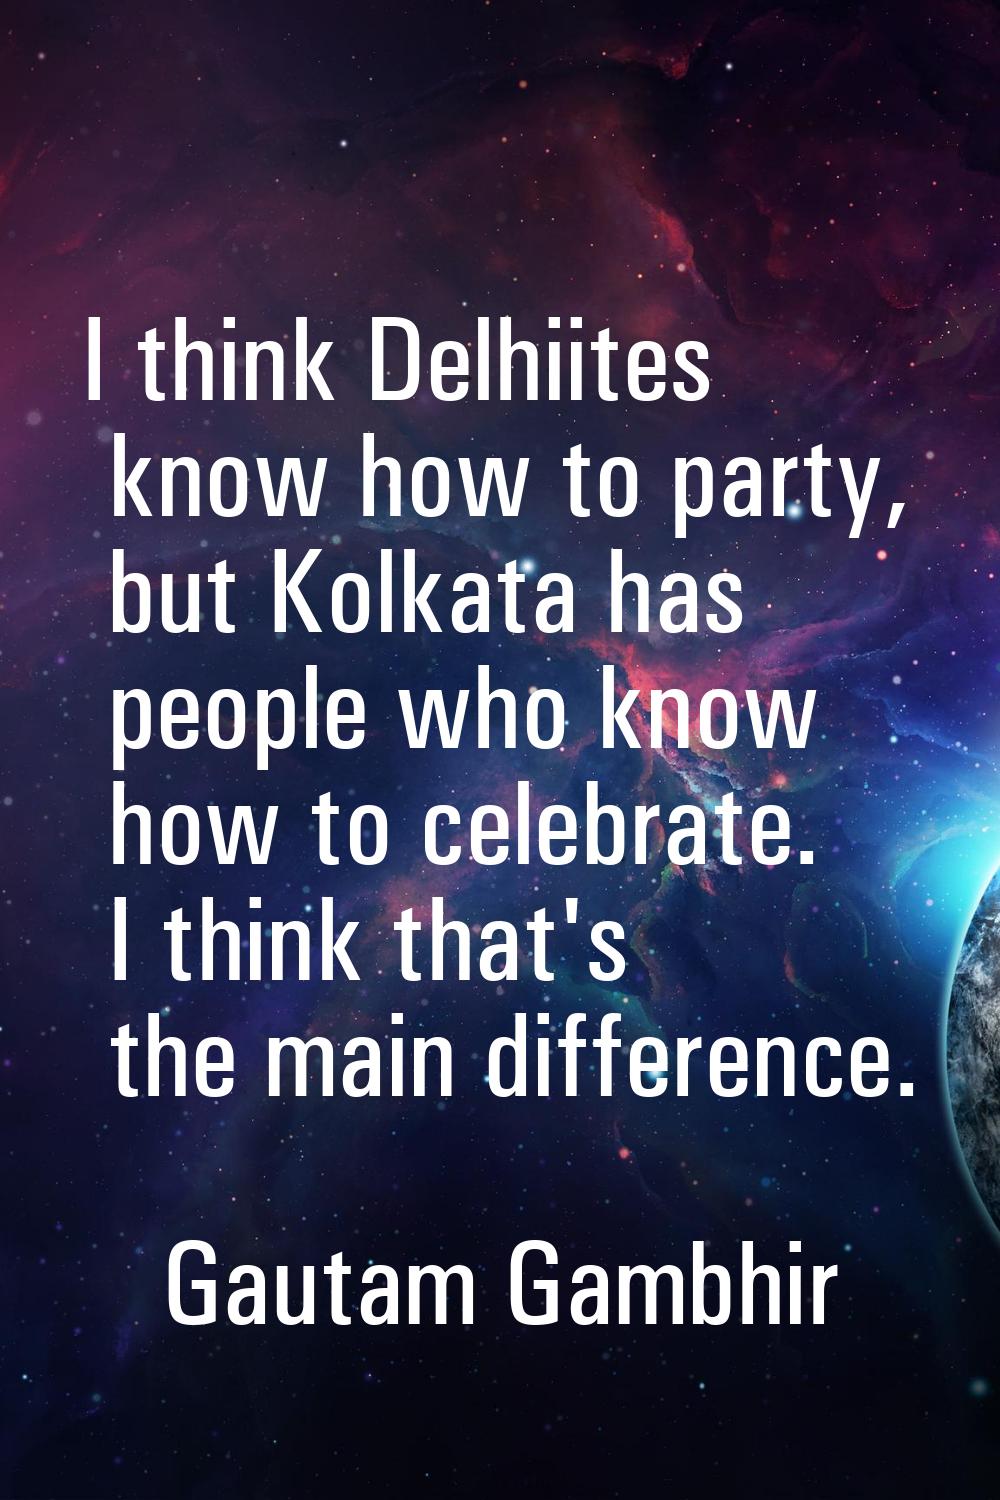 I think Delhiites know how to party, but Kolkata has people who know how to celebrate. I think that